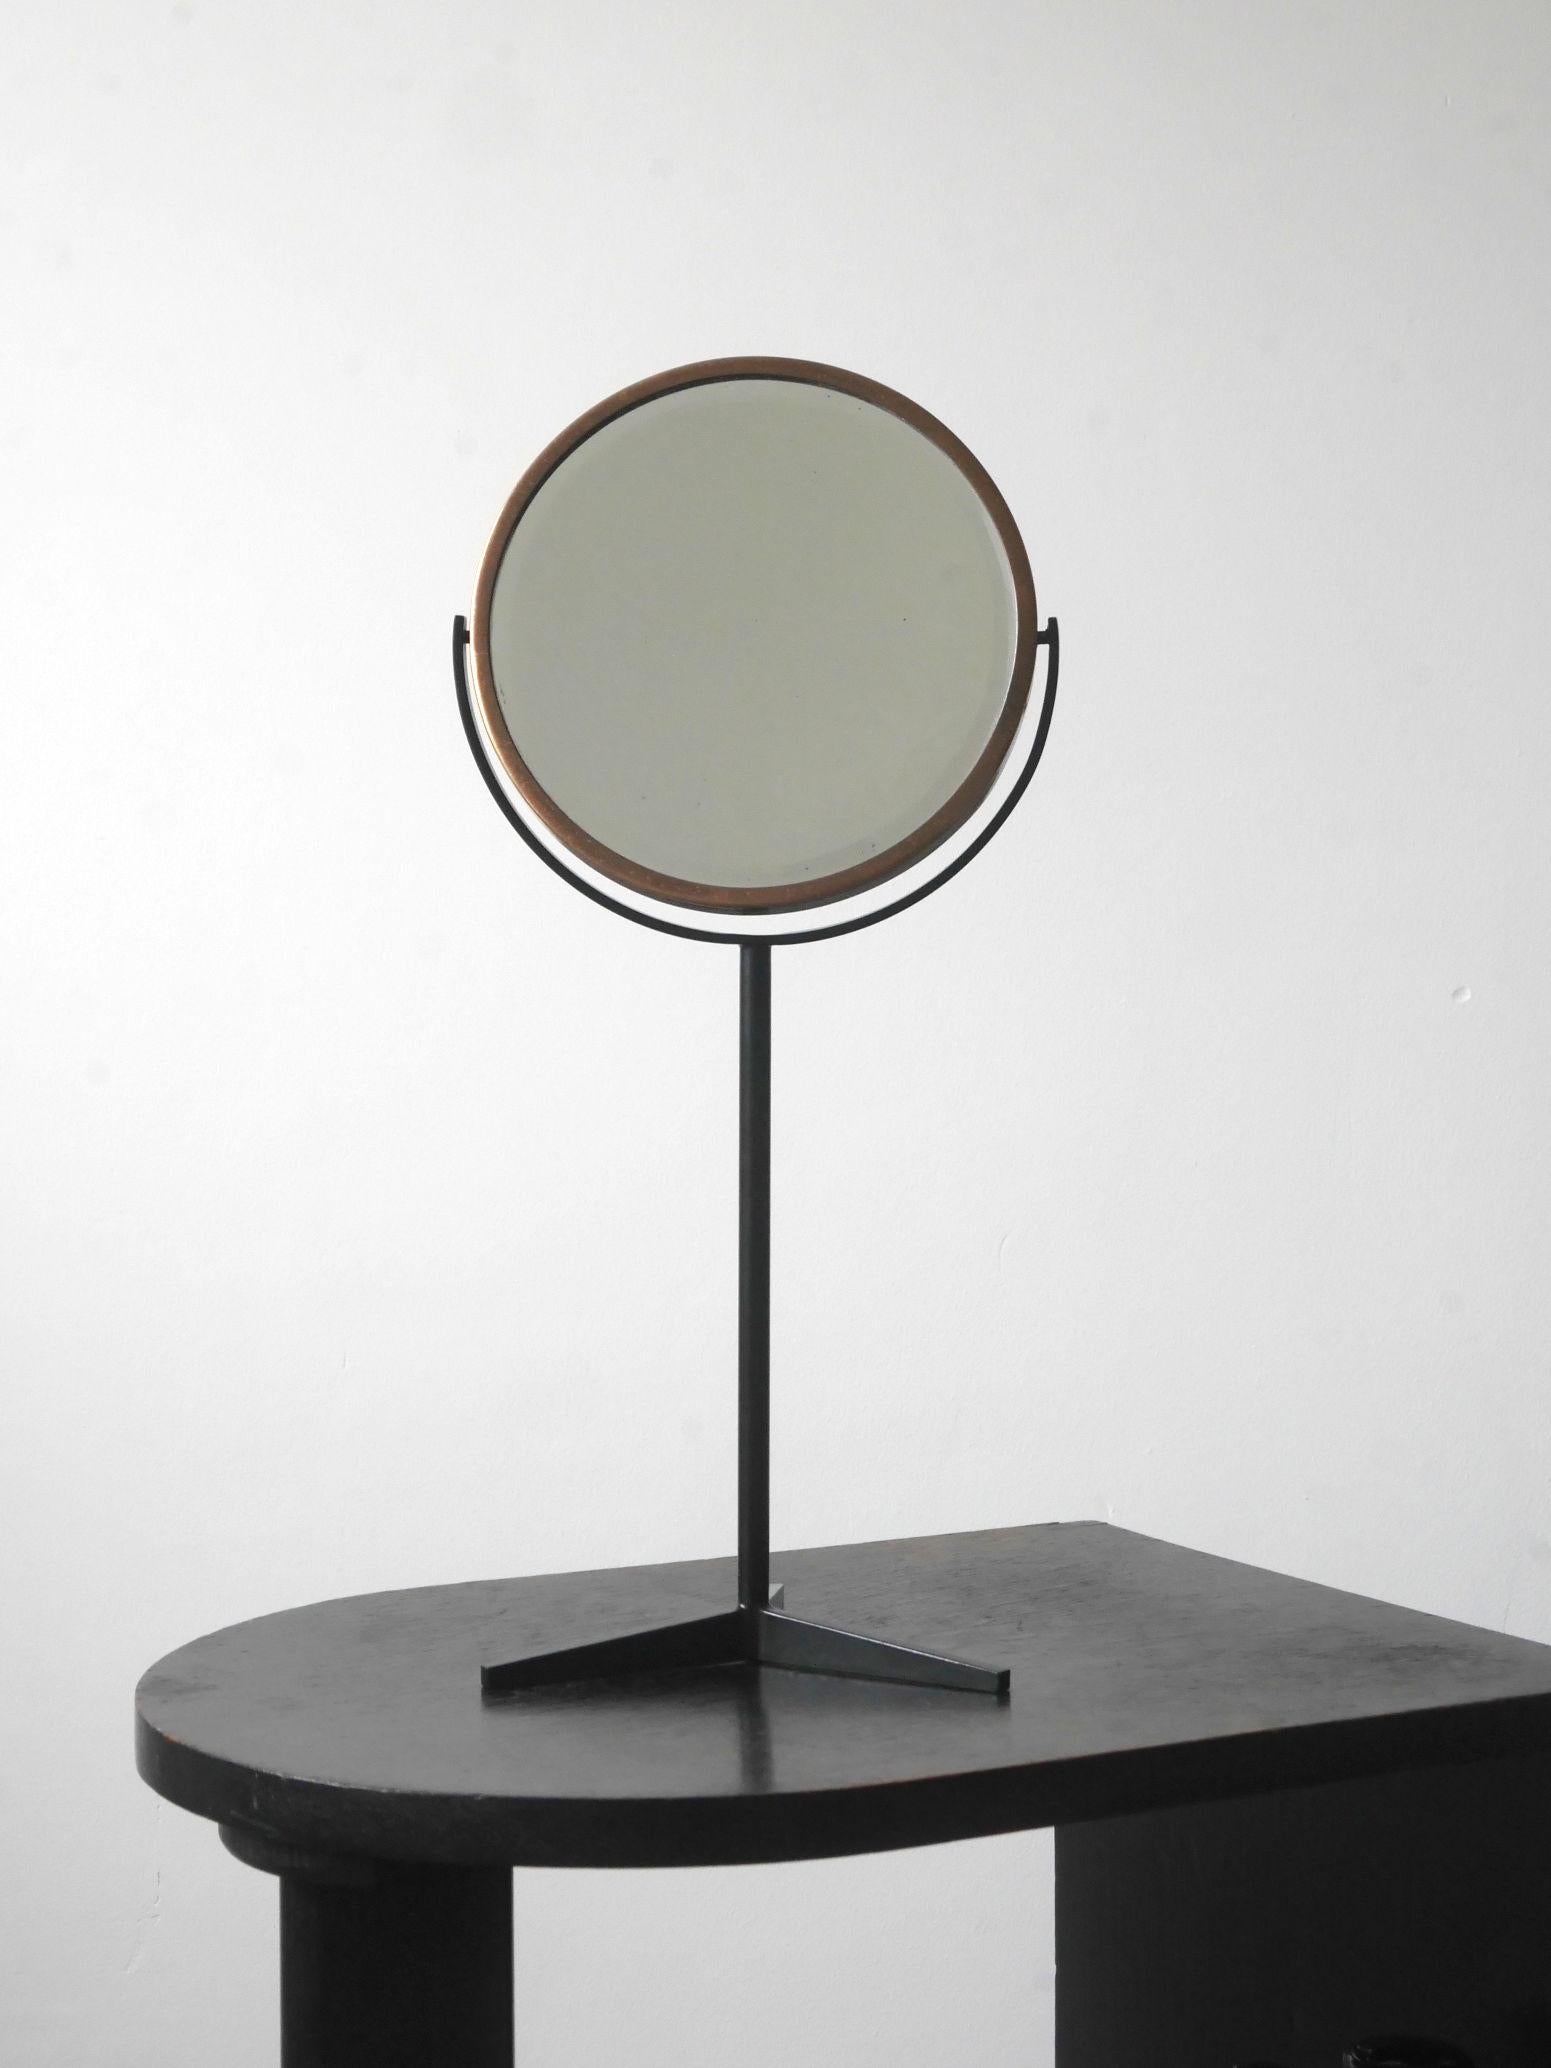 Model PC180 table mirror designed in 1961 by Colin Beales and made by Peter Cuddon, England. 

Made of black painted steel with a slender frame and tripod base. The bevelled mirror is set in a brass frame and swivels round fully. 

A beautiful